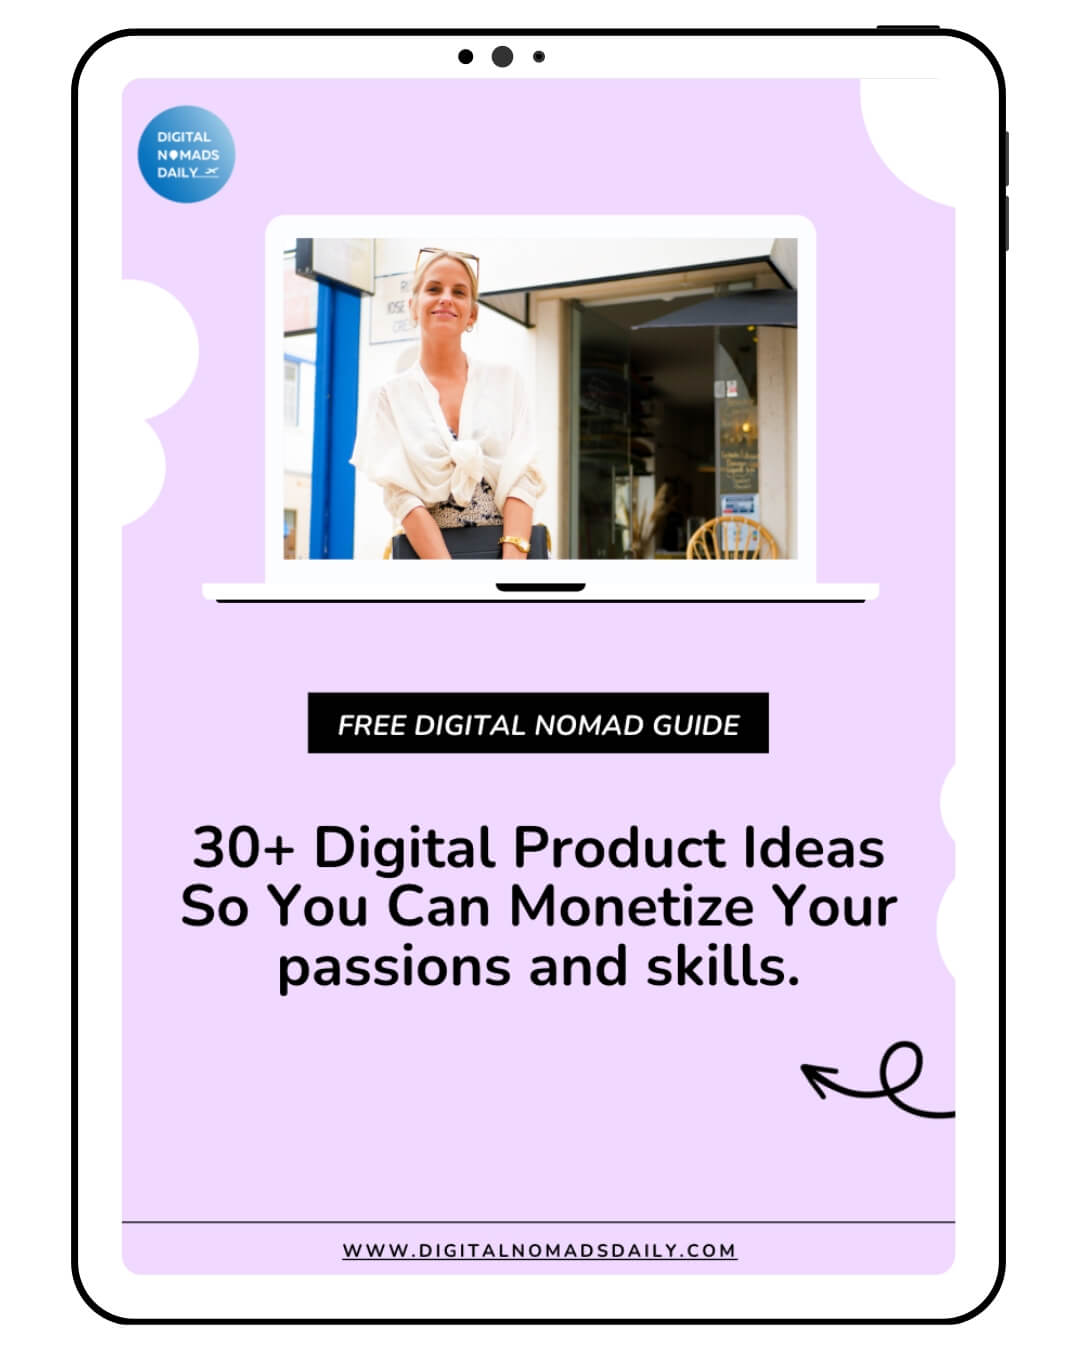 cover Digital Product Ideas So You Can Monetize Your passions and skills by digital nomads daily